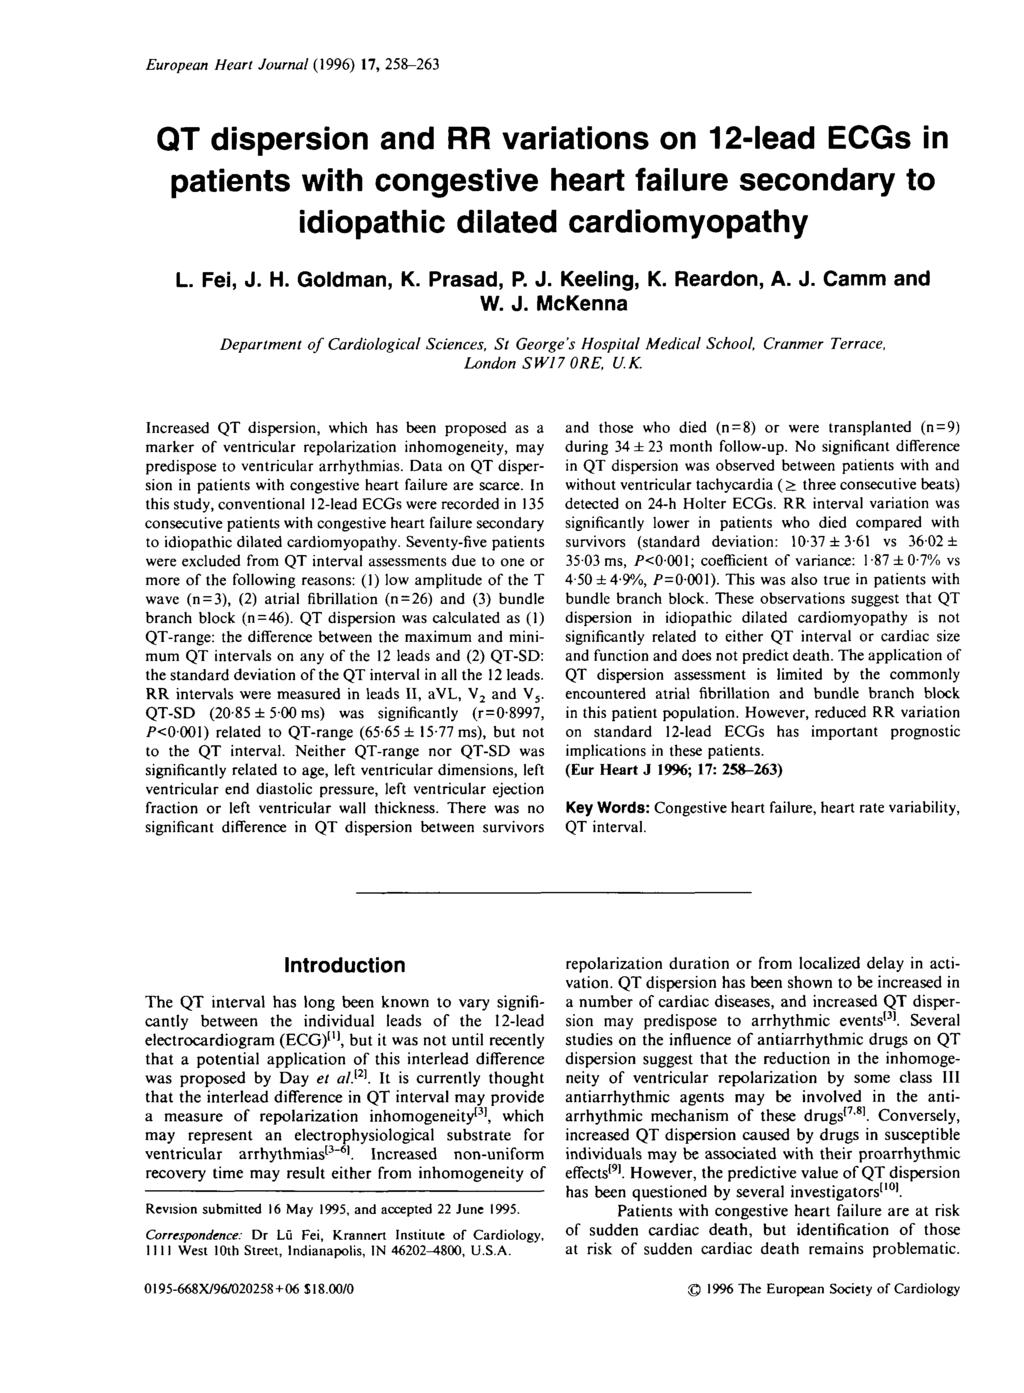 European Heart Journal (1996) 17, 258-263 QT dispersion and RR variations on 12-lead ECGs in patients with congestive heart failure secondary to idiopathic dilated cardiomyopathy L. Fei, J. H. Goldman, K.